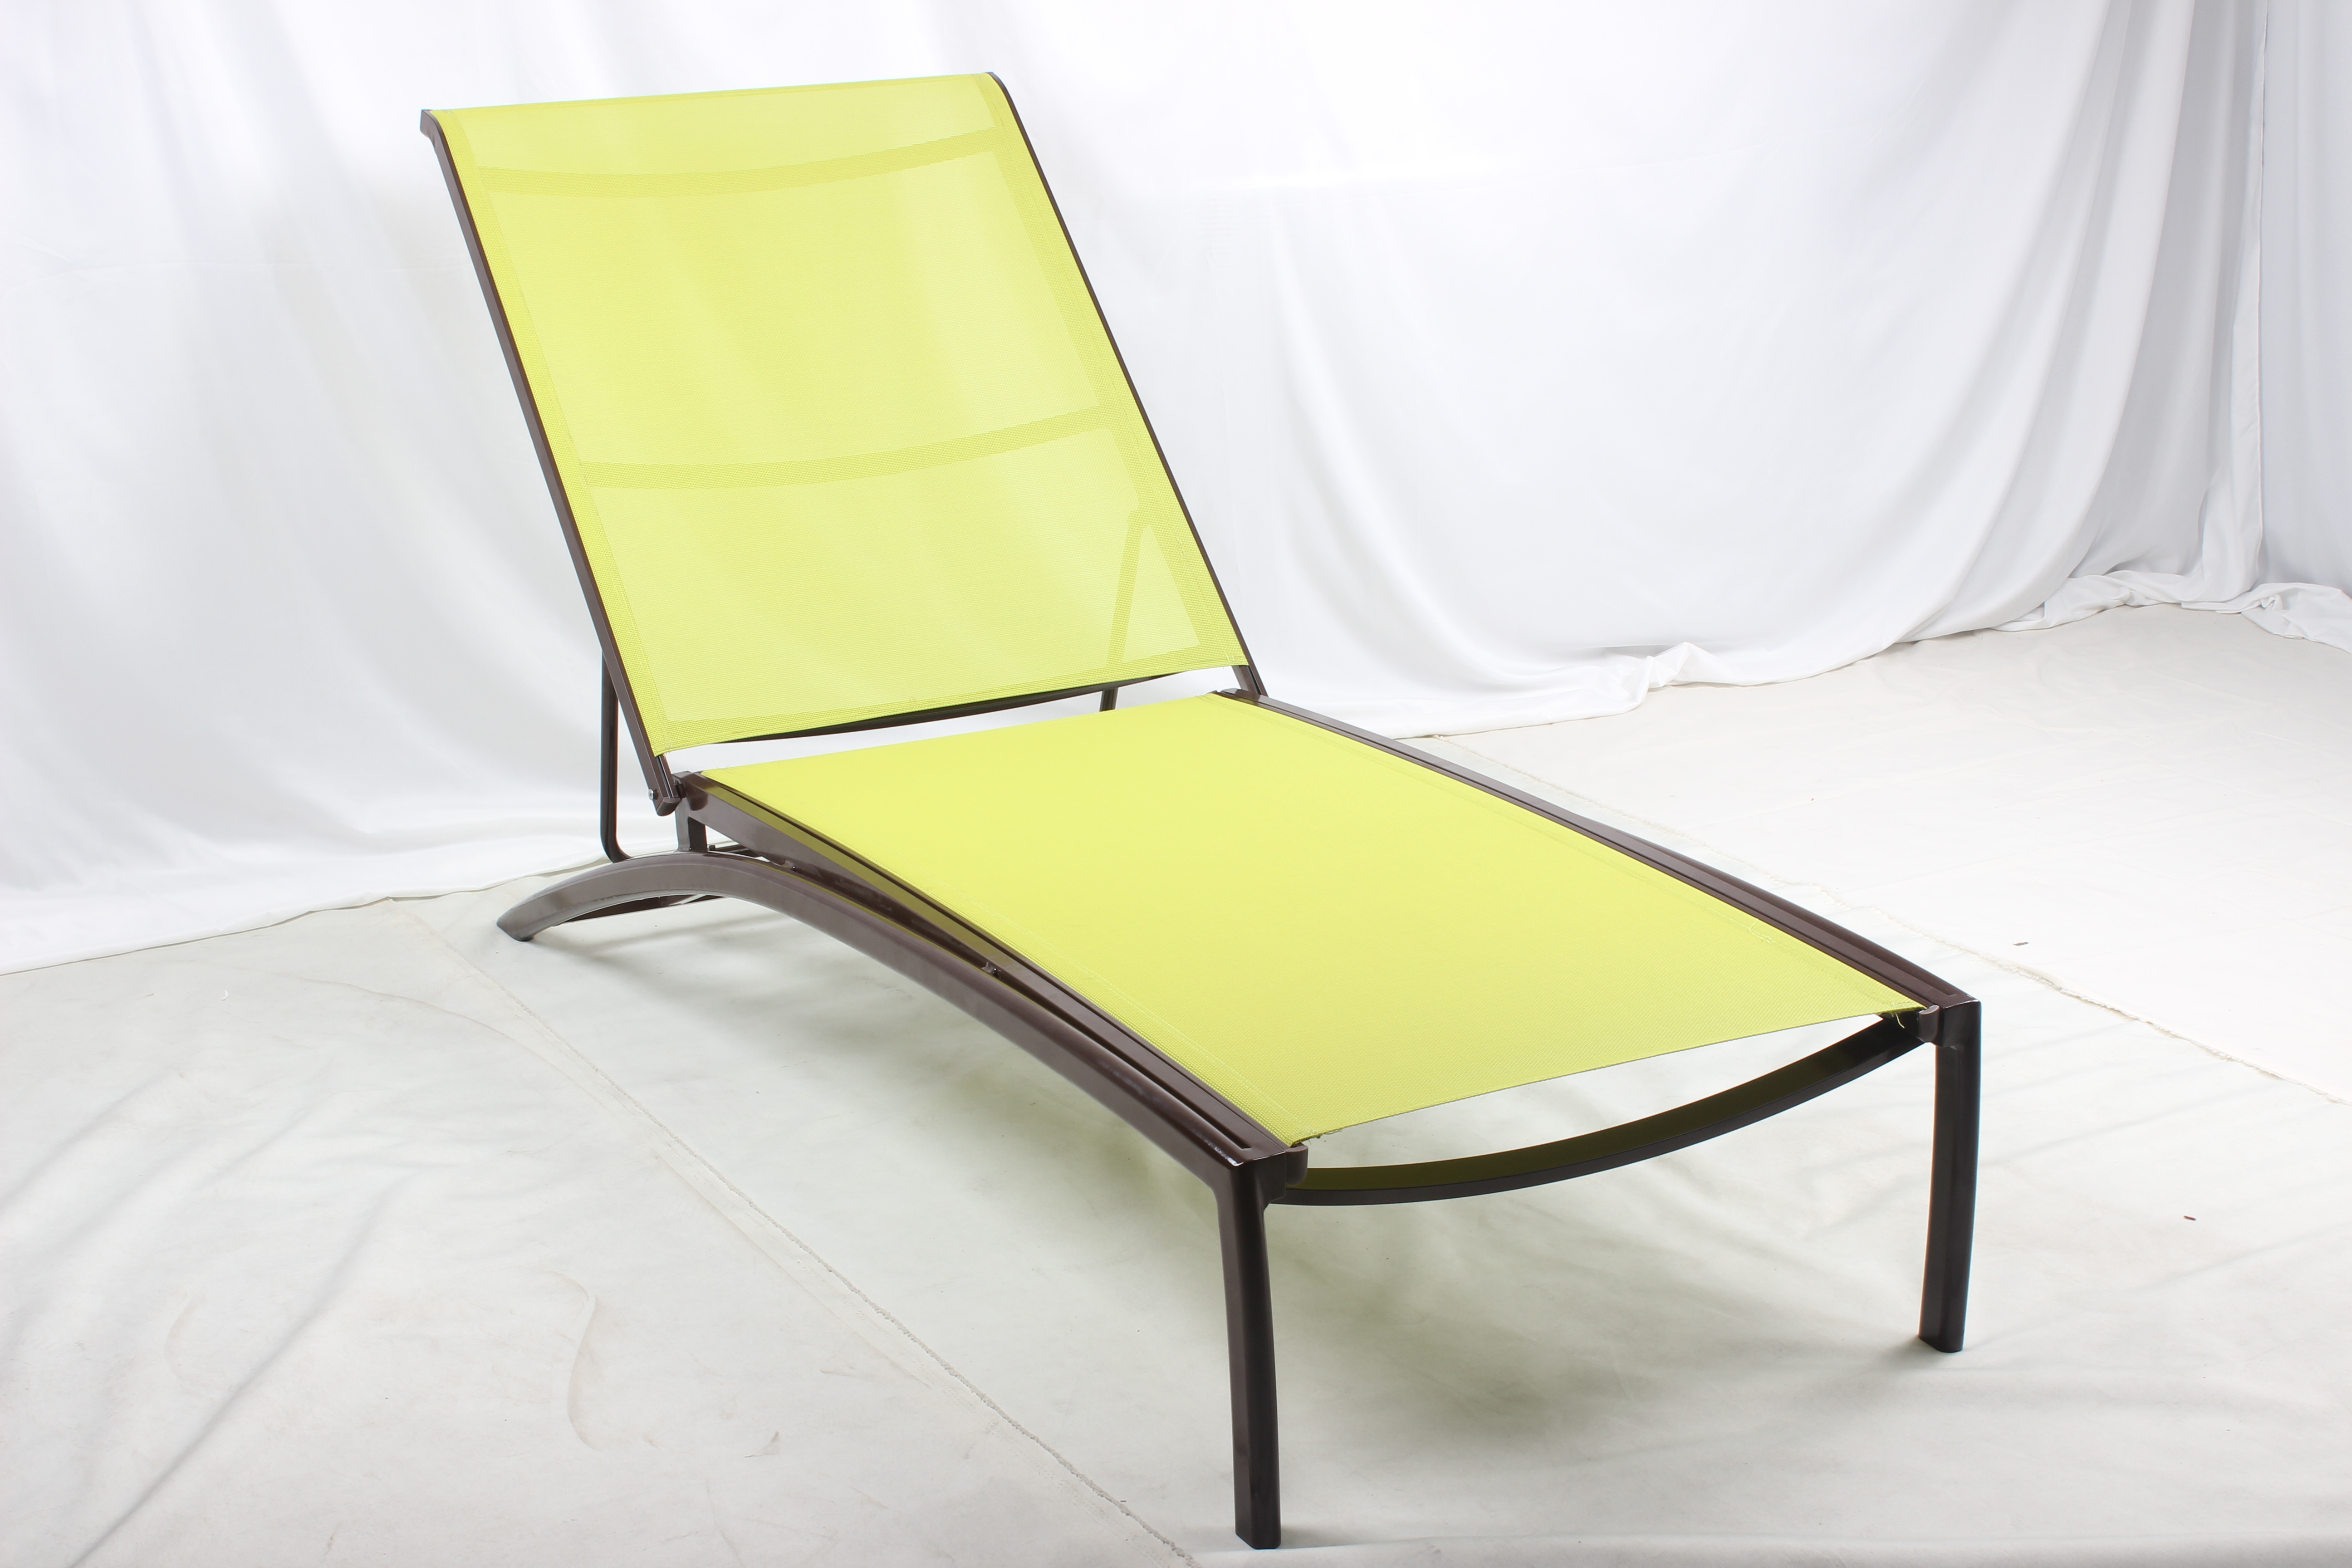 Outdoor patio aluminum chaise lounge with side table